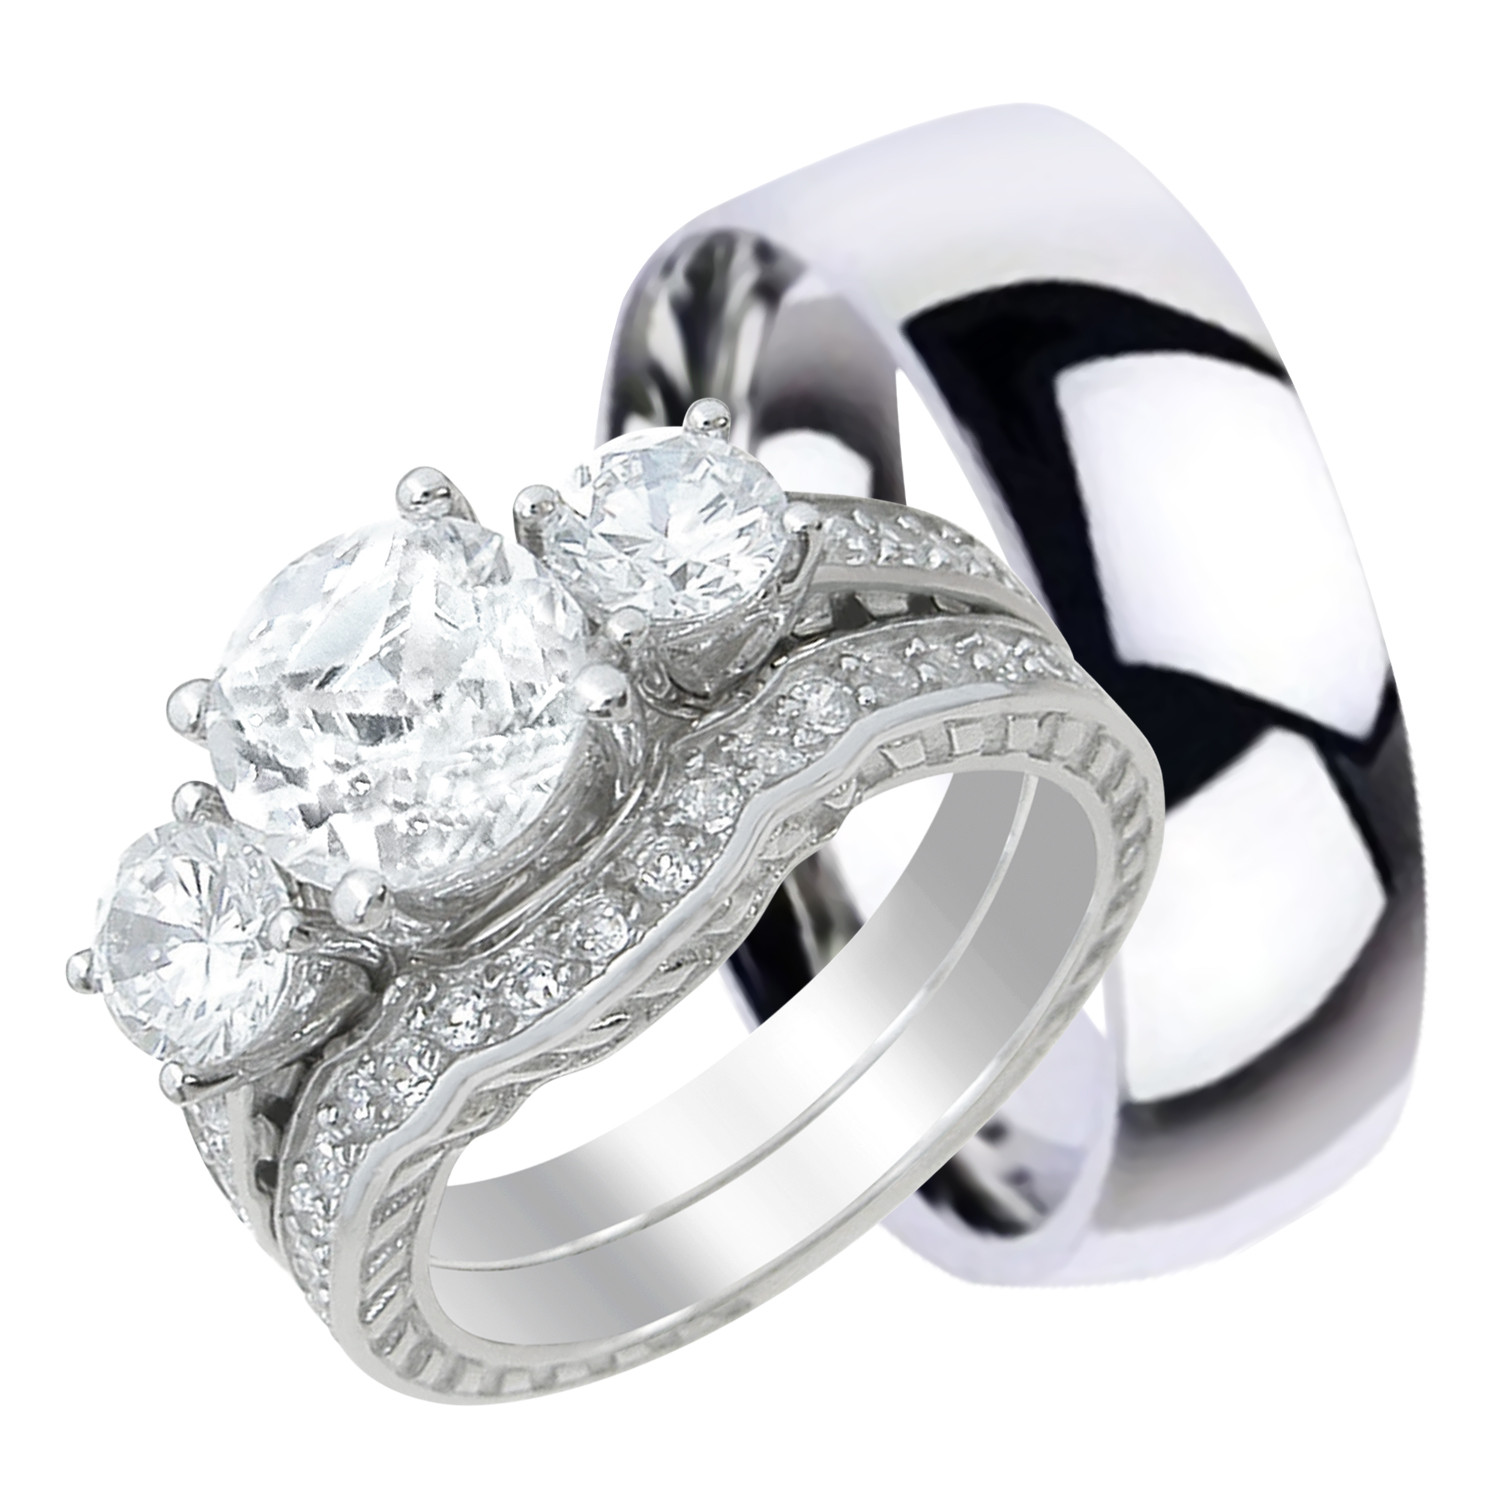 Silver Wedding Ring Sets For Him And Her
 His and Hers Wedding Ring Sets Matching Silver Titanium